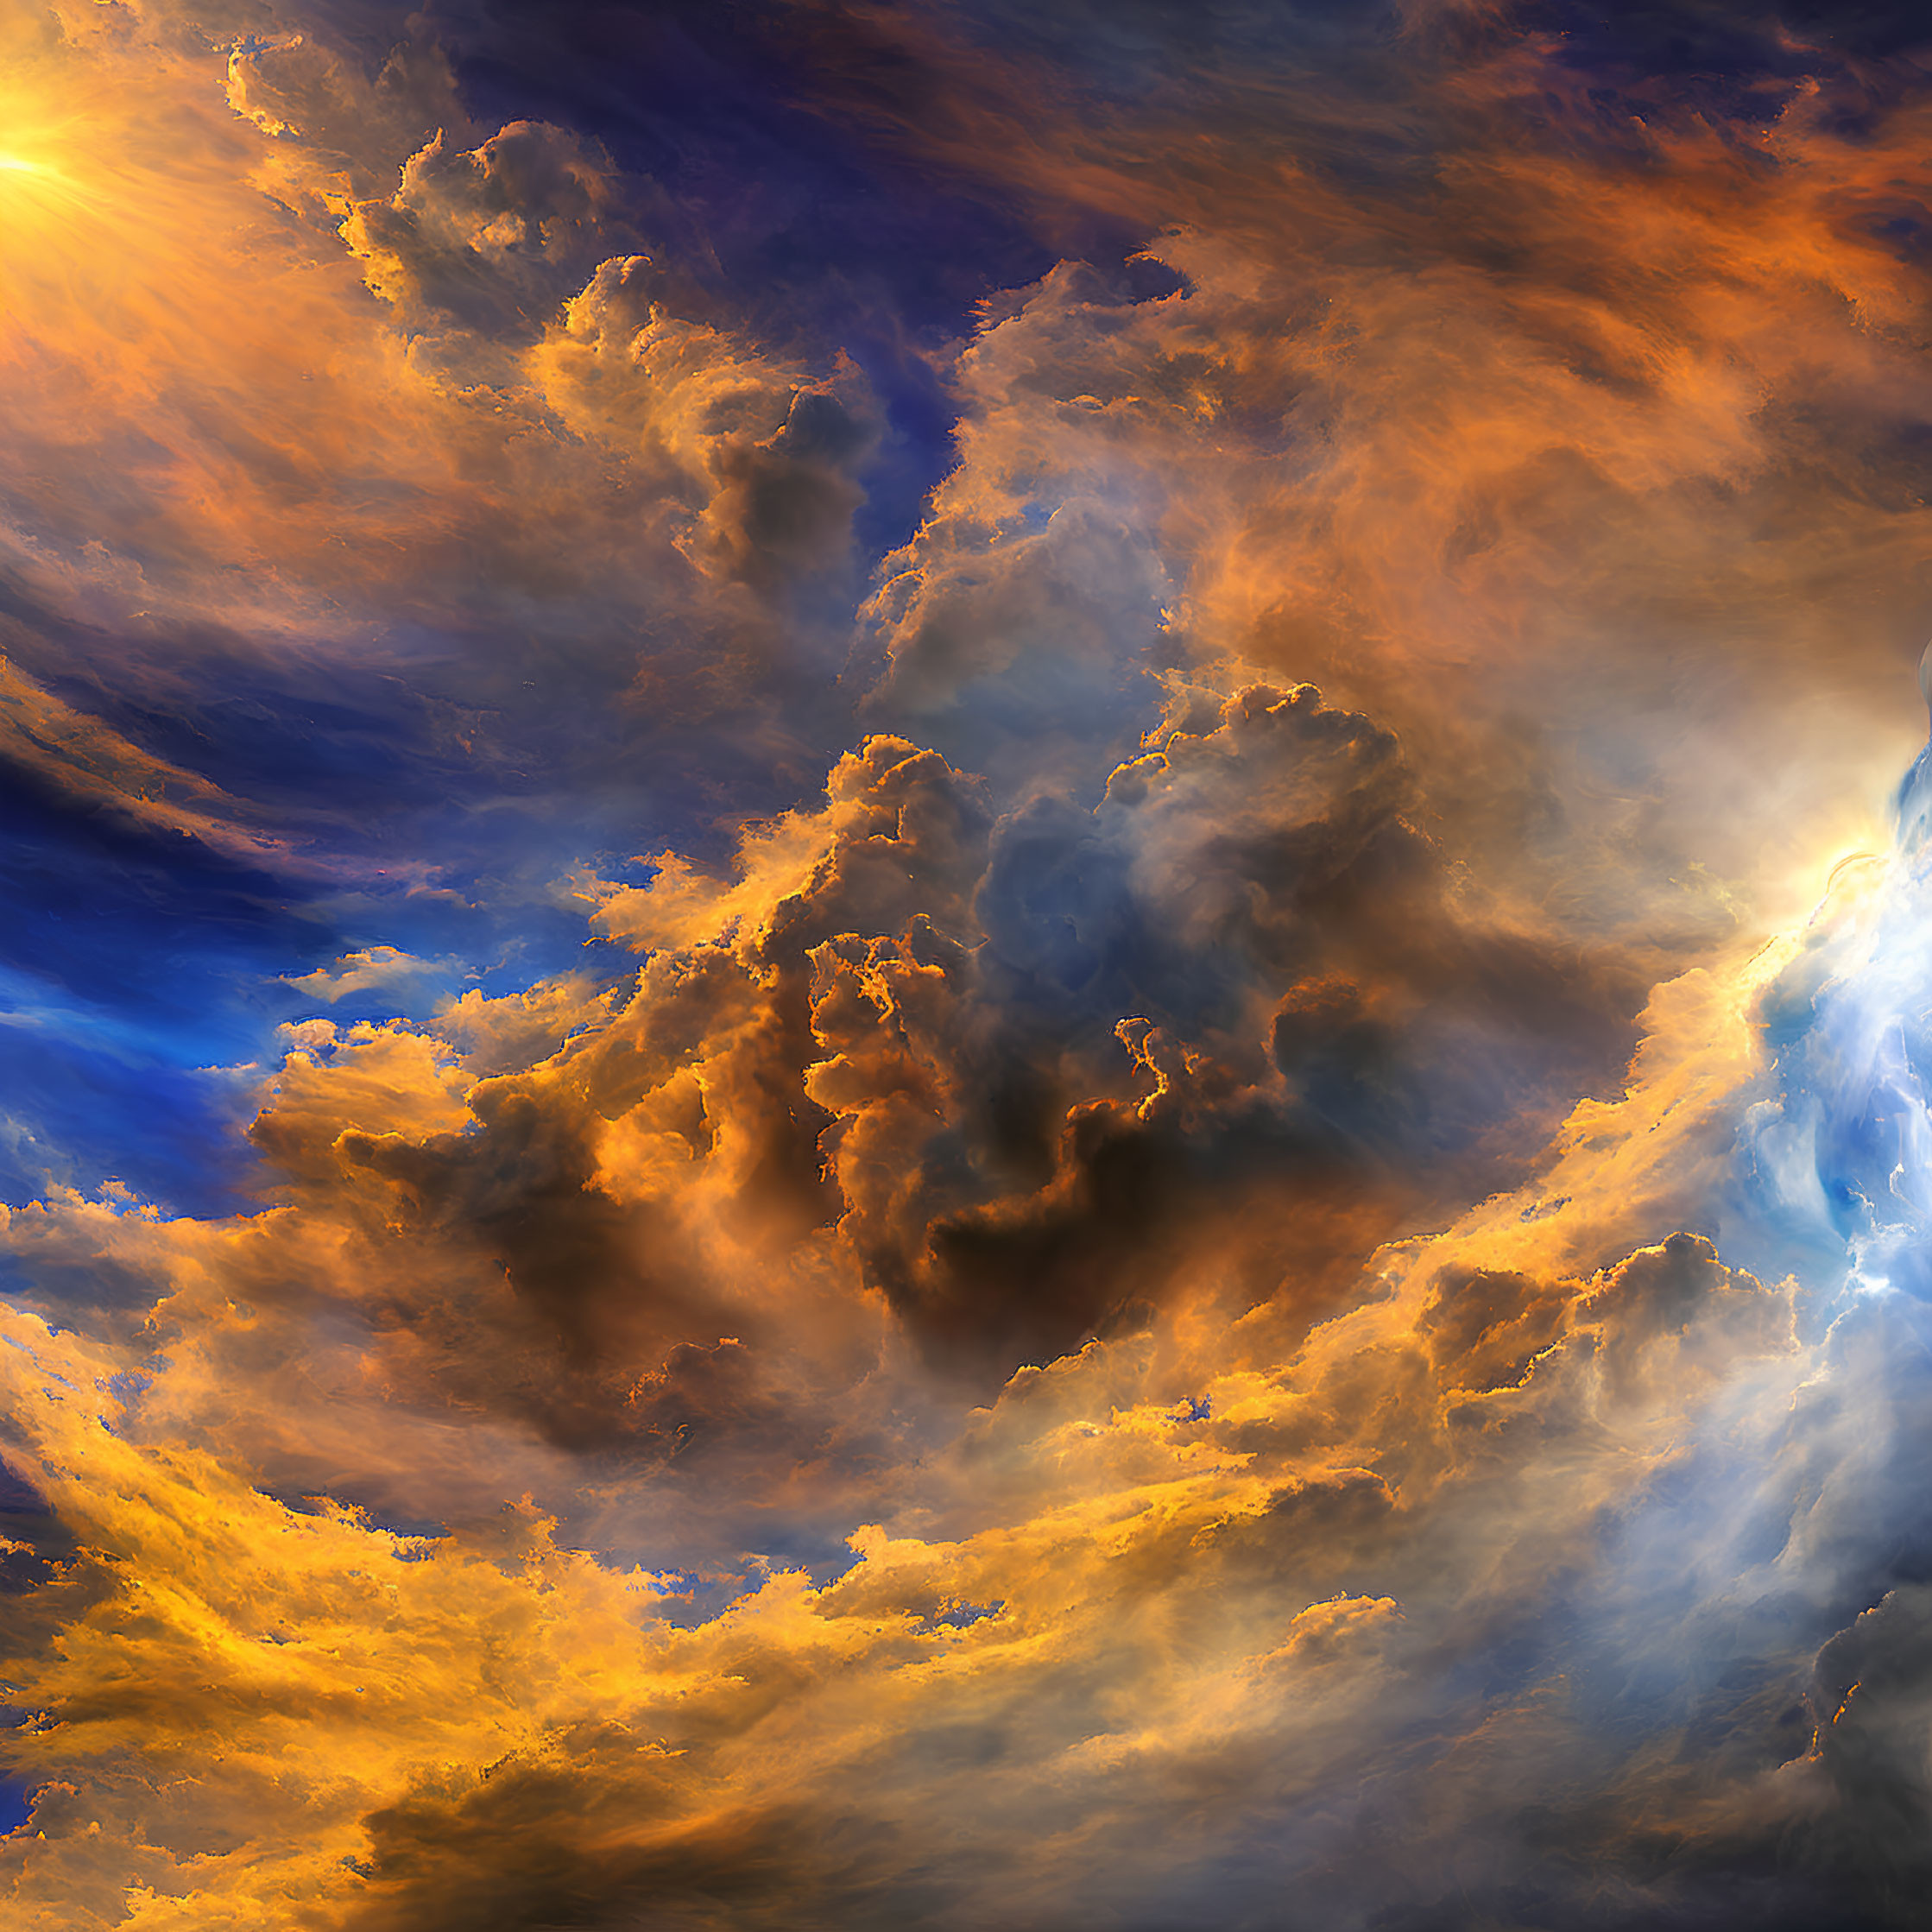 Dramatic swirling clouds in orange, blue, and golden hues